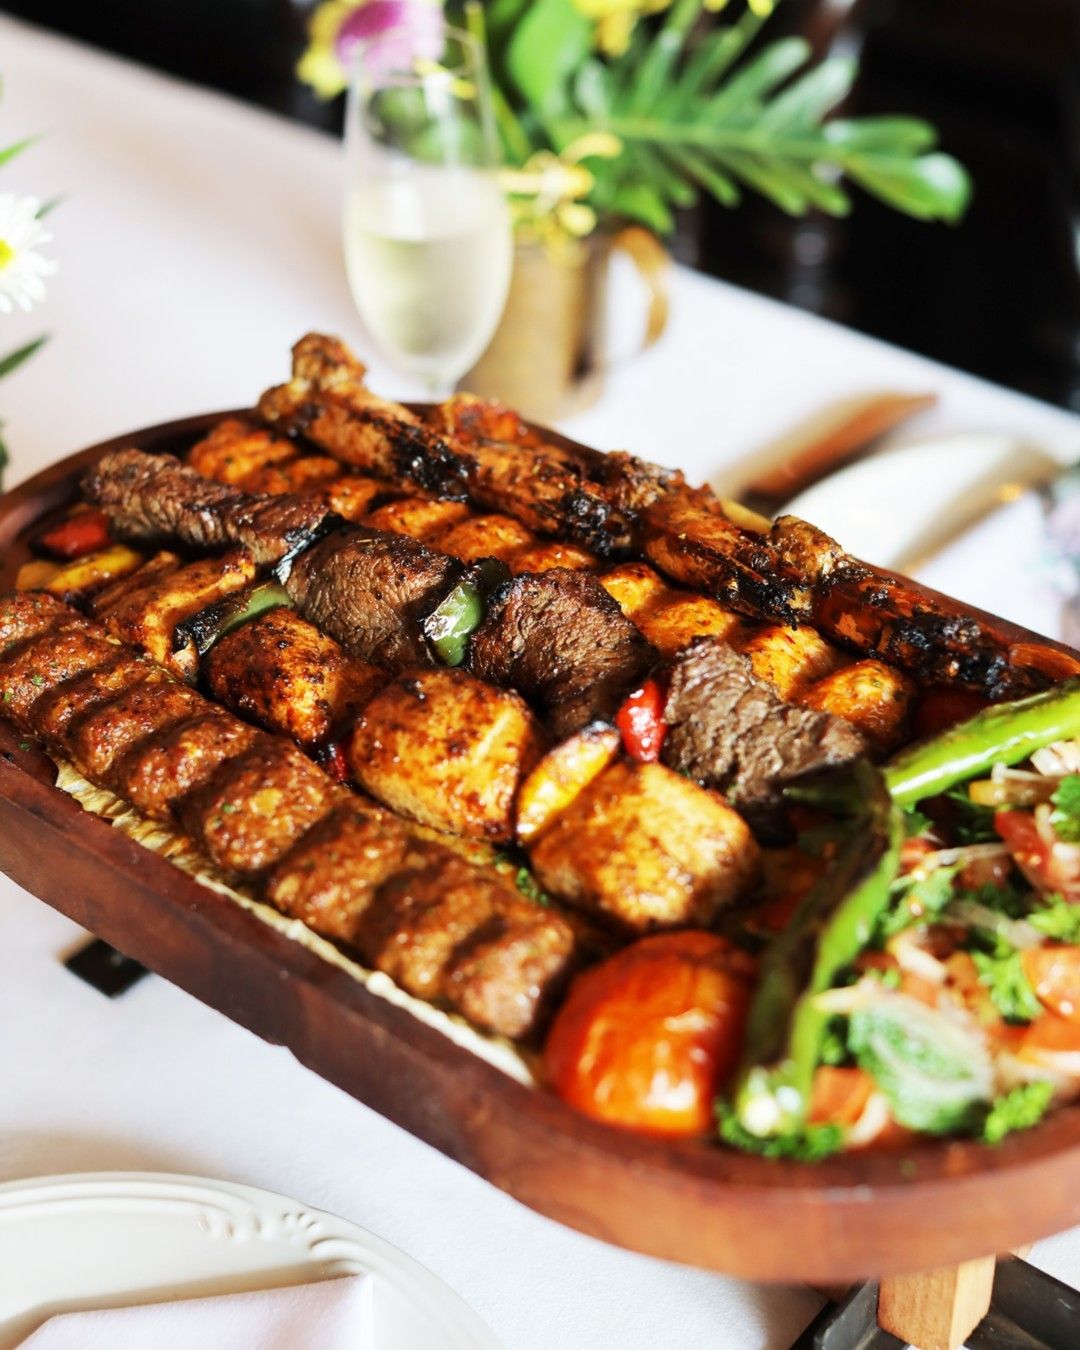 Middle Eastern cuisine served in plate